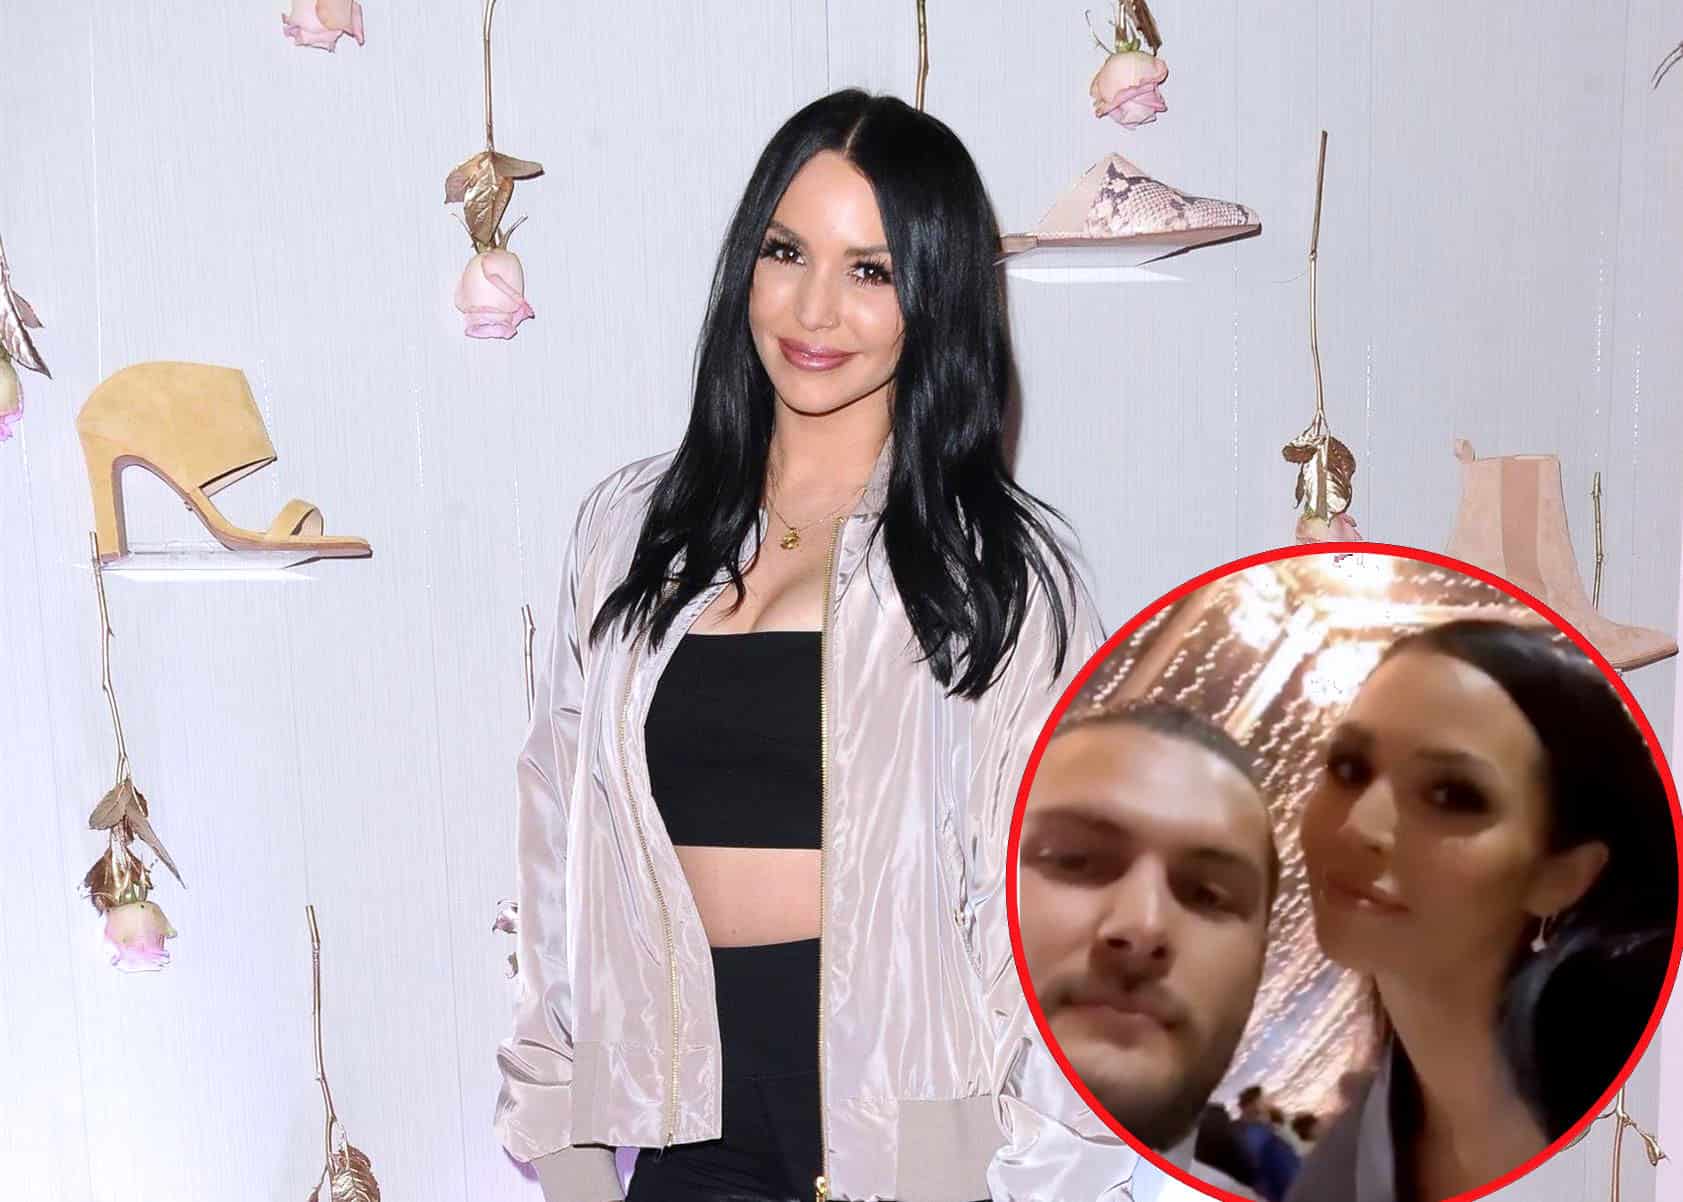 Vanderpump Rules' Scheana Shay Reveals Reason This Season Was the Hardest to Film, Explains Why Relationship With Brock Davies Feels Like Her "First Real One"